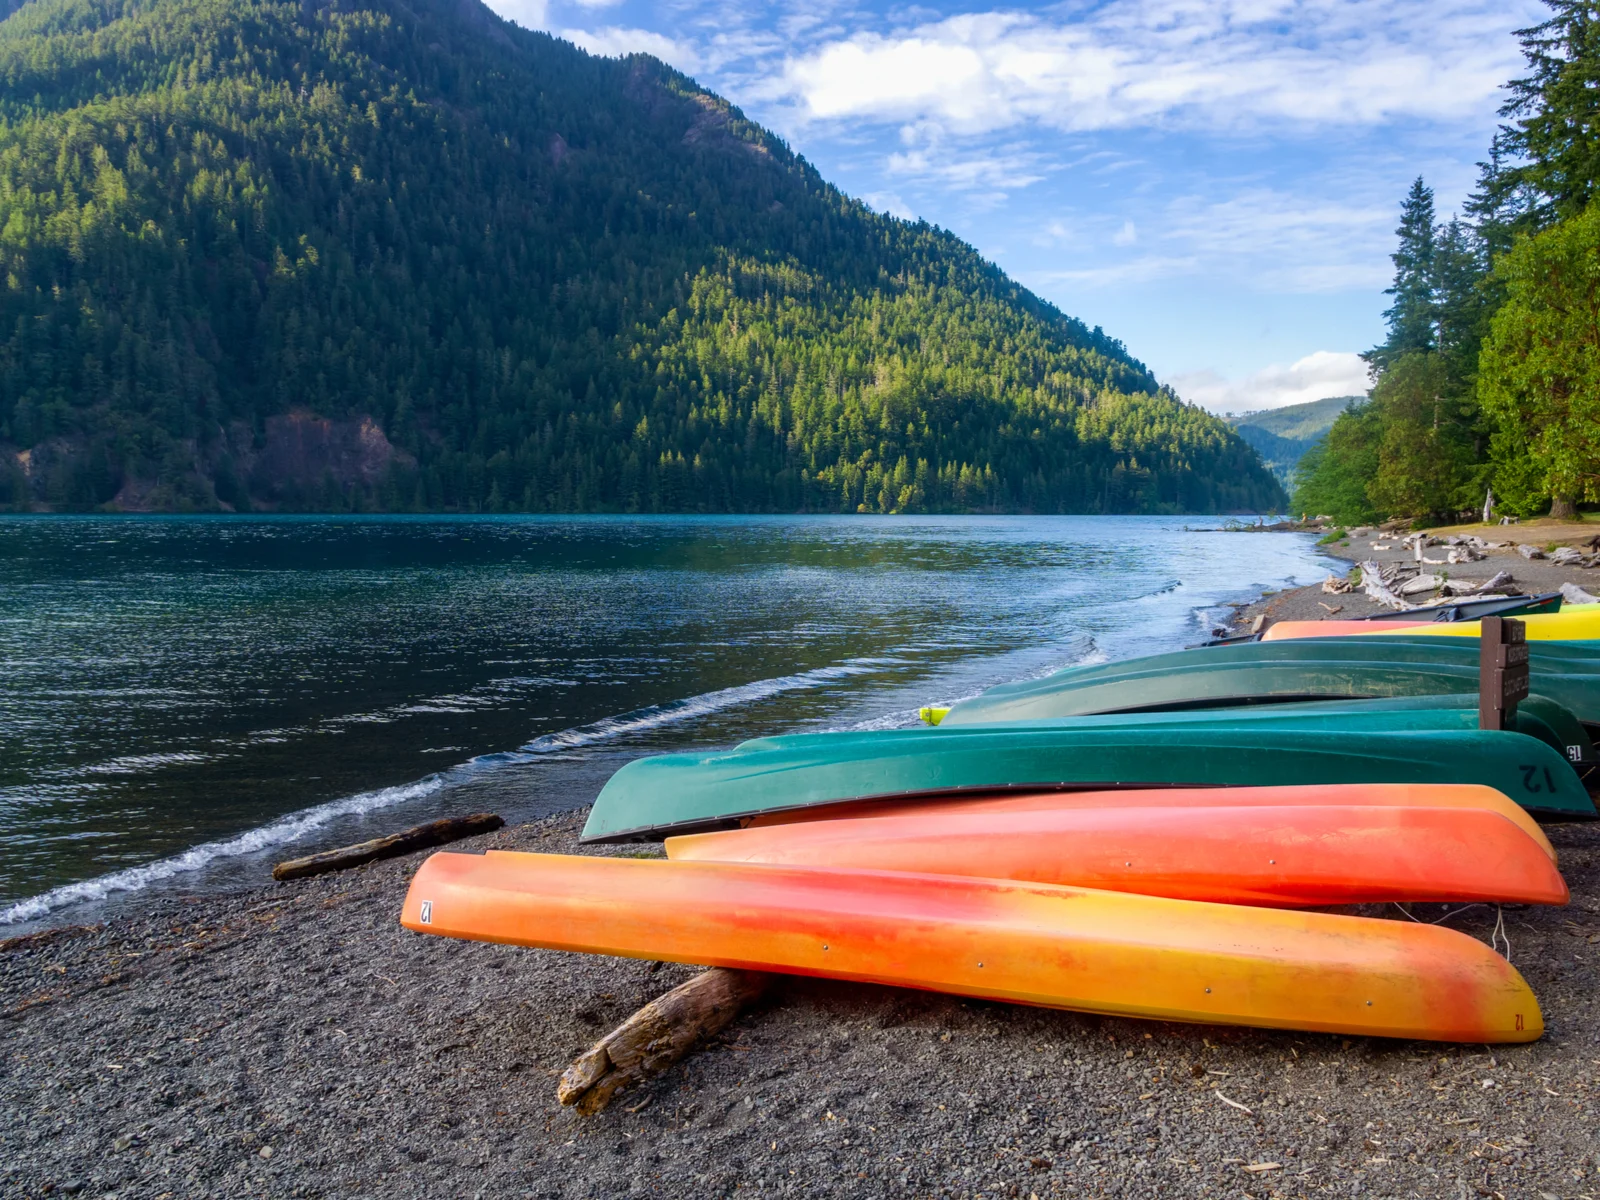 Cool view of canoes at the Olympic National Park